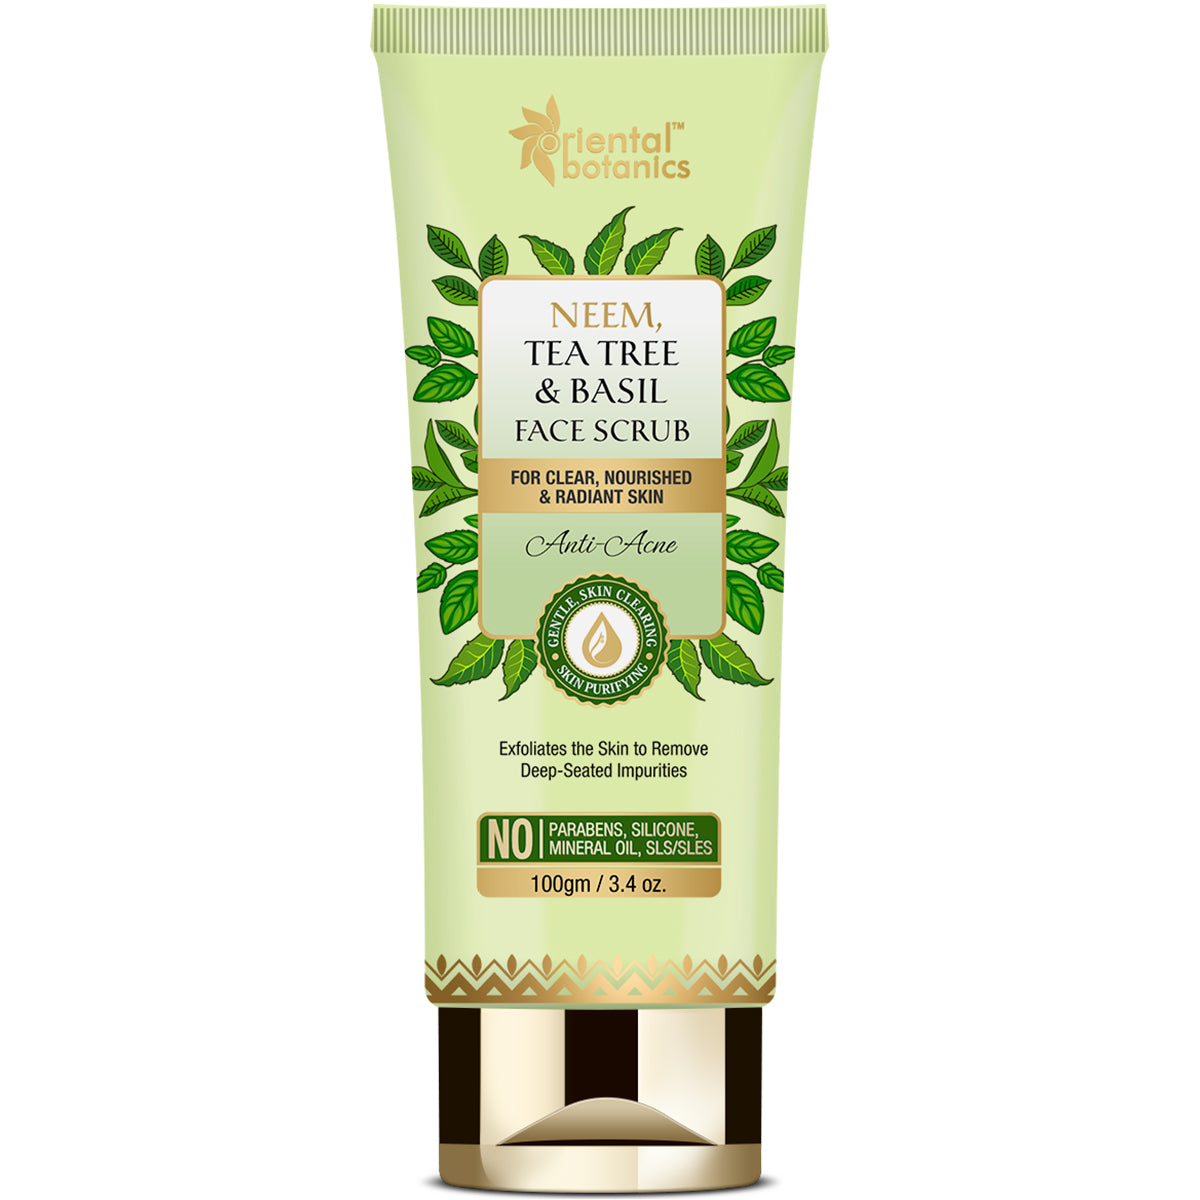 Oriental Botanics Neem, Tea Tree and Basil Anti Acne Face Scrub - For Clear, Nourished and Radiant Skin - No Parabens, Silicones, 100 g